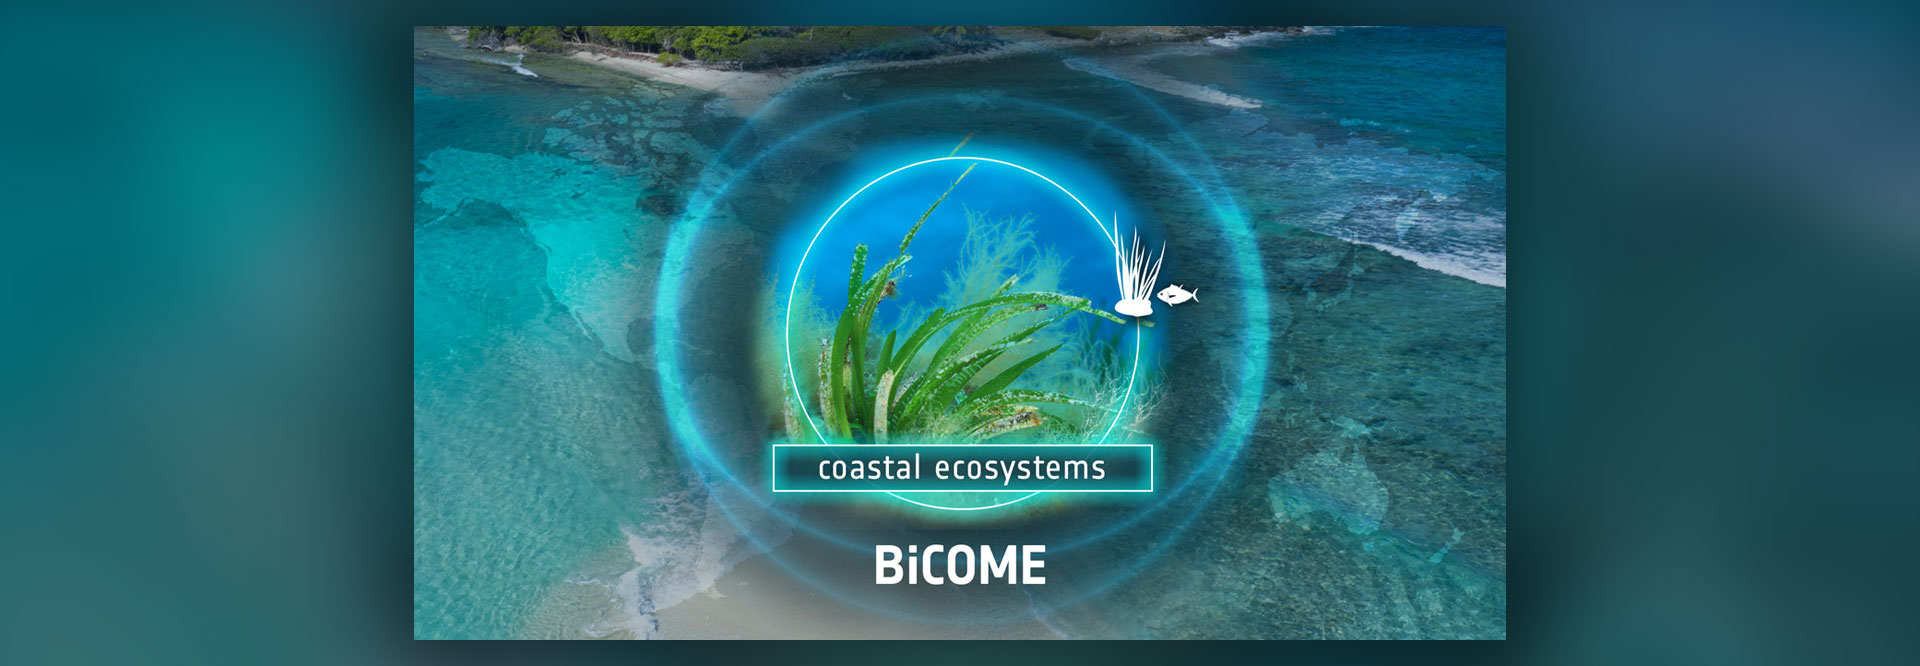 Key visual showing earth and underwater with a centre image of a seagrass meadow